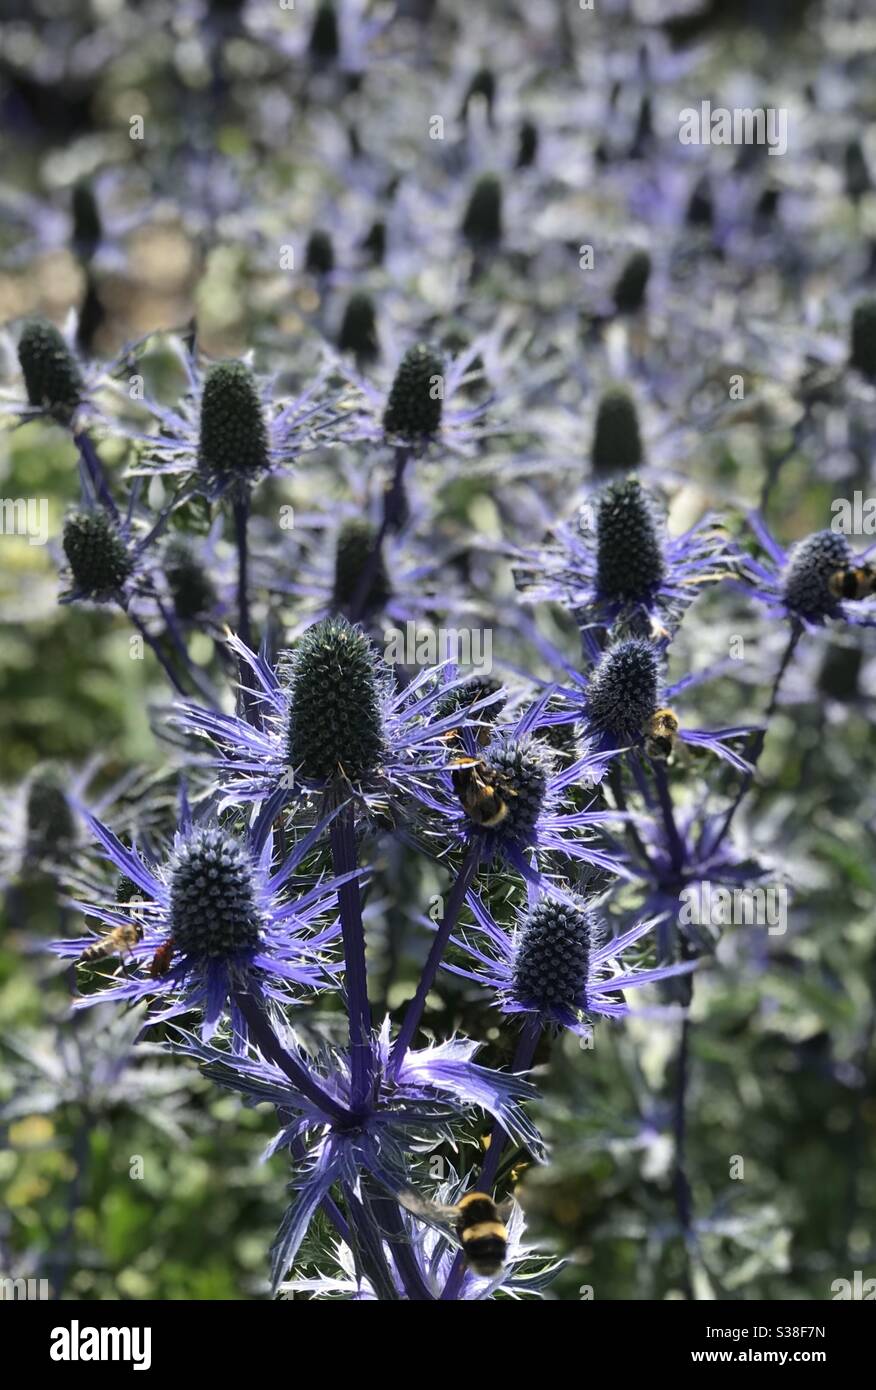 Bees and hoverflies on the Sea Holly (Eryngium) at Sir Harold Hillier Gardens Romsey Stock Photo